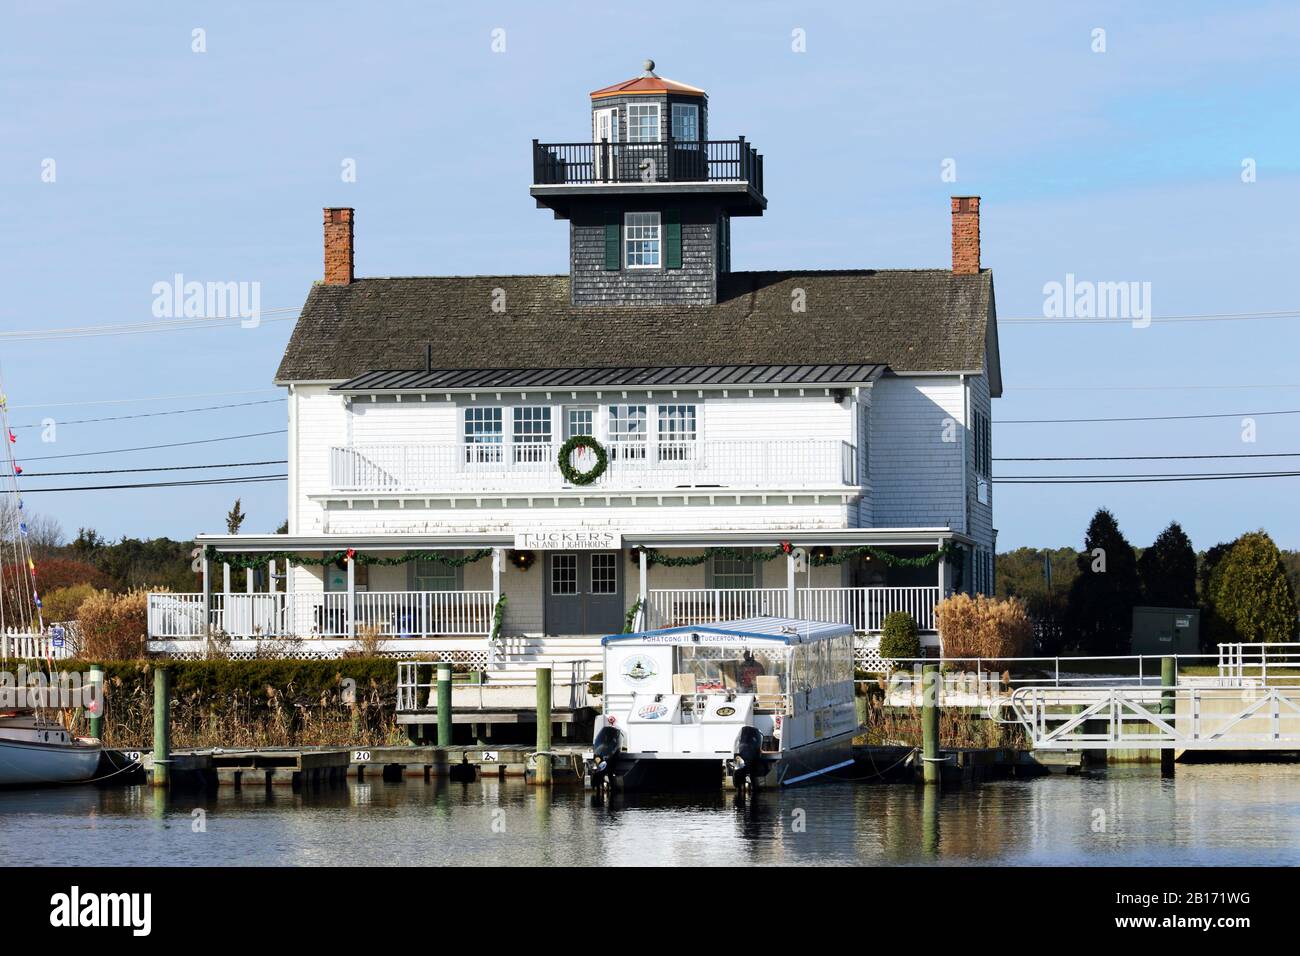 The Tuckerton Seaport and Baymen's Museum features a replica of the Tucker Island Lighthouse that was nearby. Tuckerton, New Jersey, USA Stock Photo